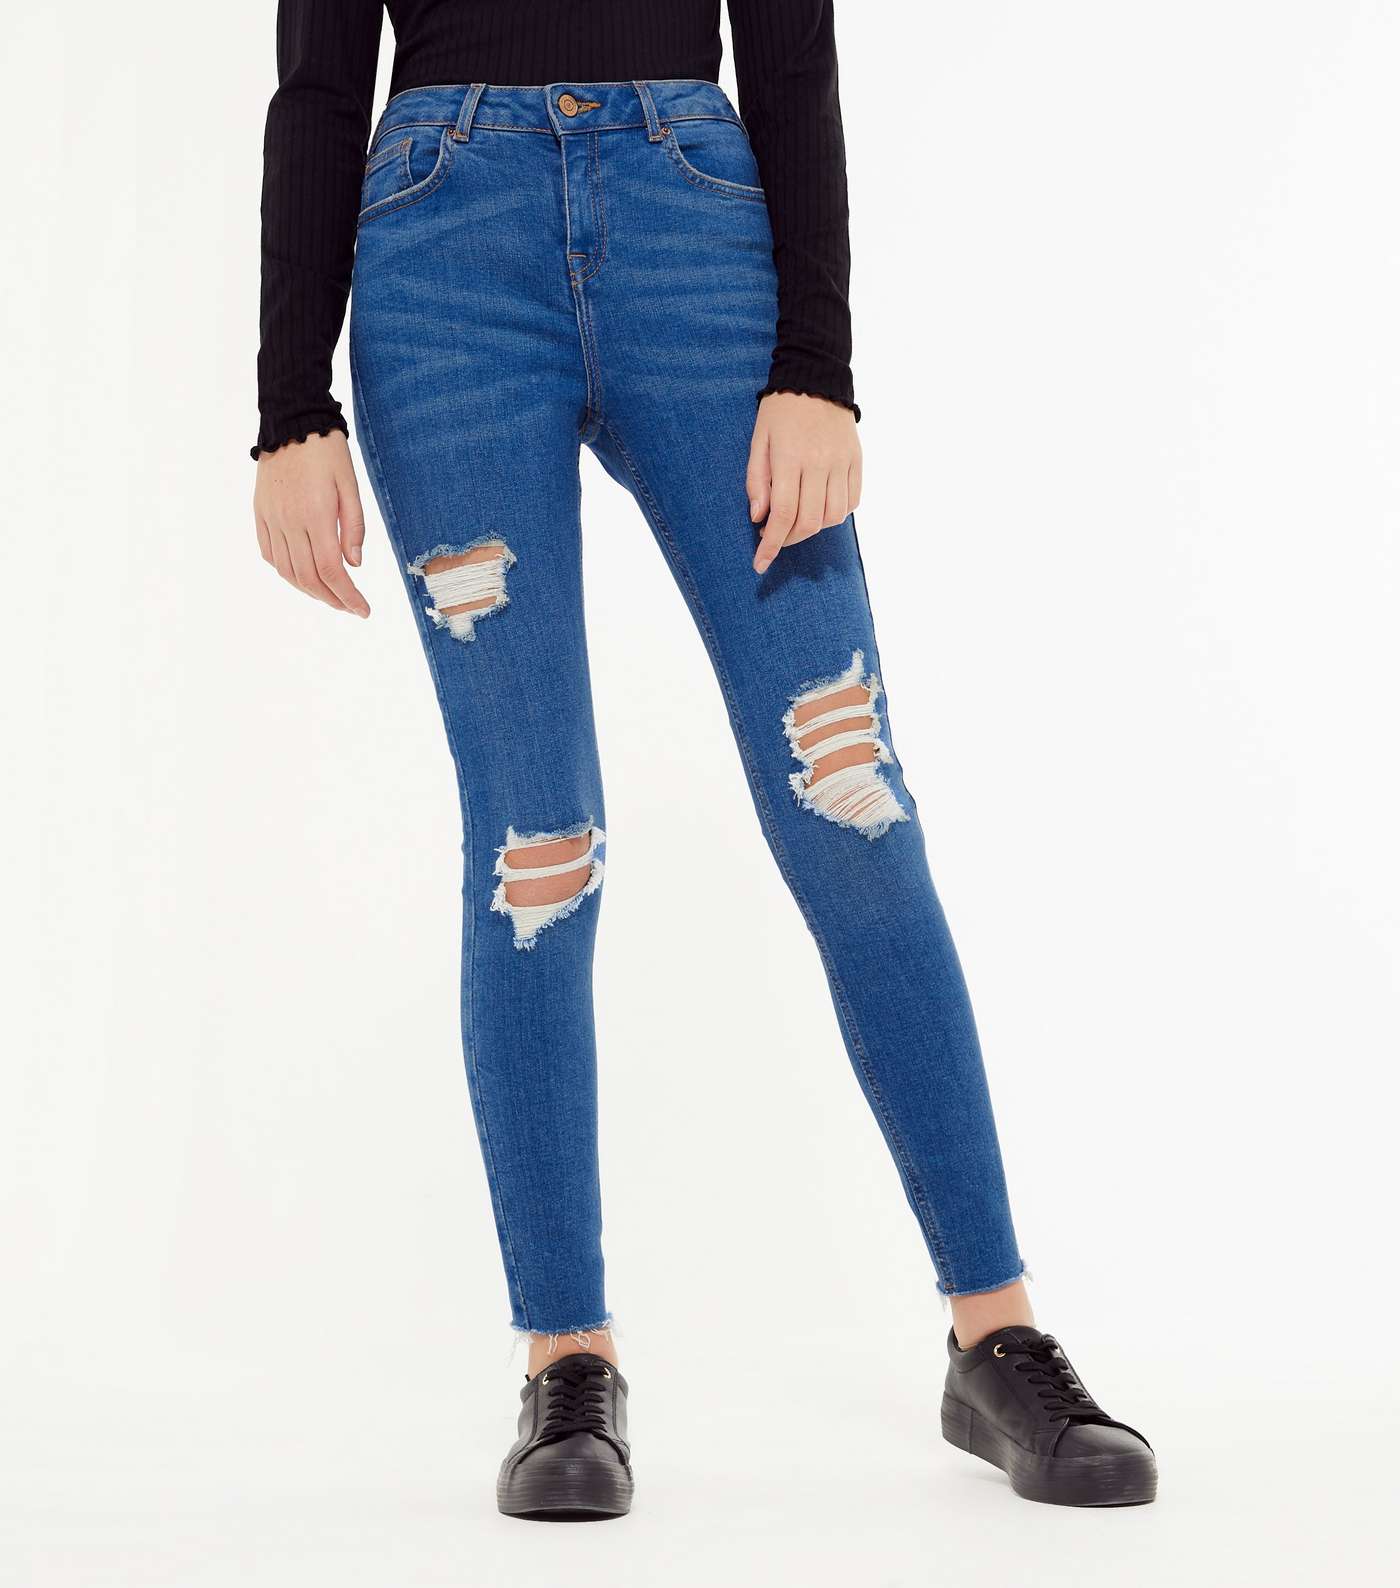 Girls Bright Blue Ripped Skinny Jeans Image 2